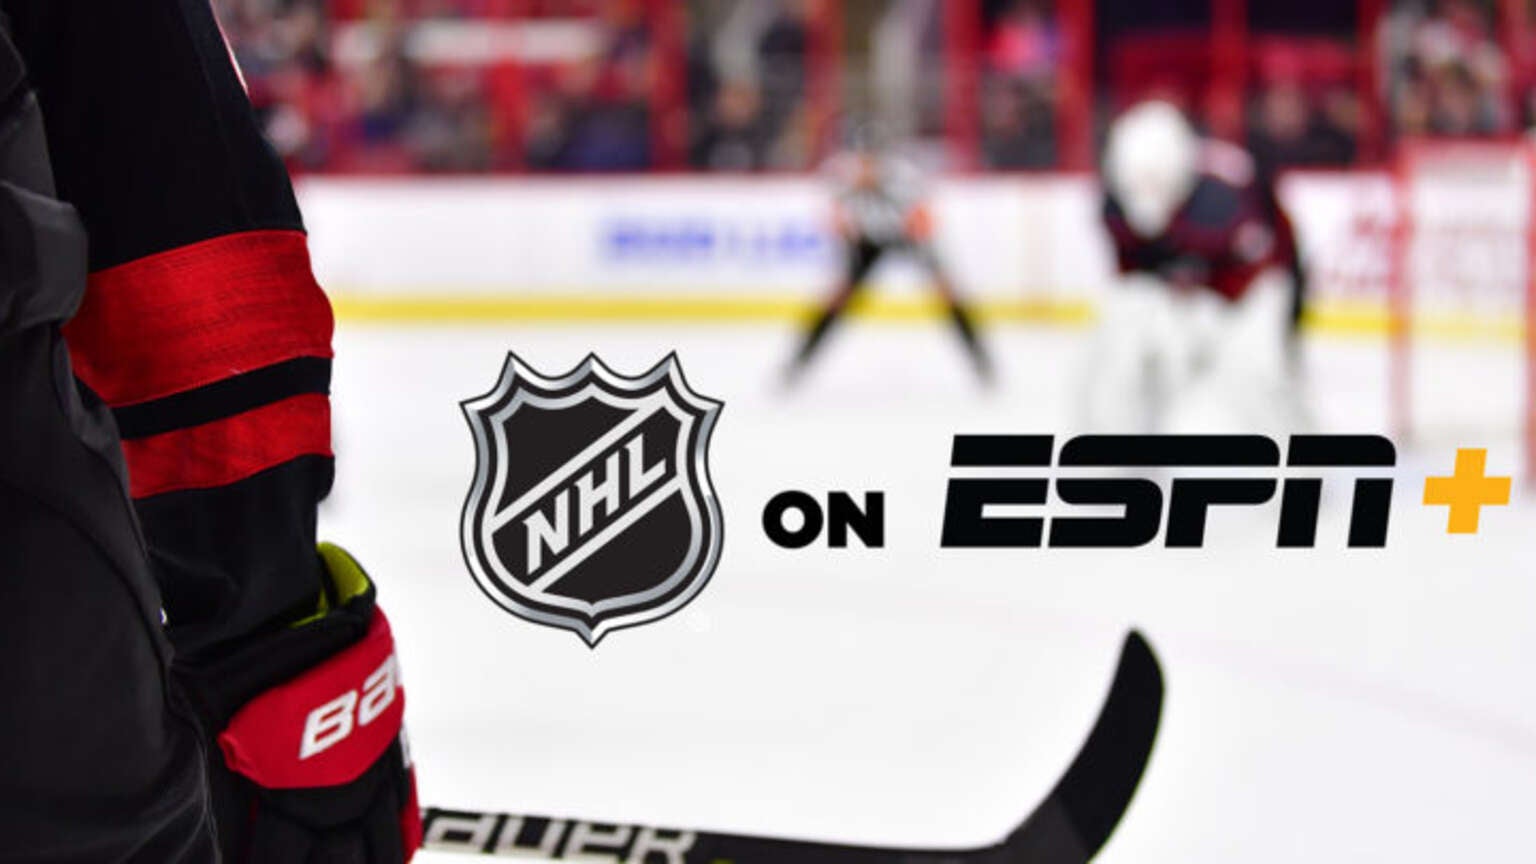 Nhl New Deal With Espn Adds Exclusive Games To Espn And Hulu Shifts Nhl Tv To Espn The Streamable